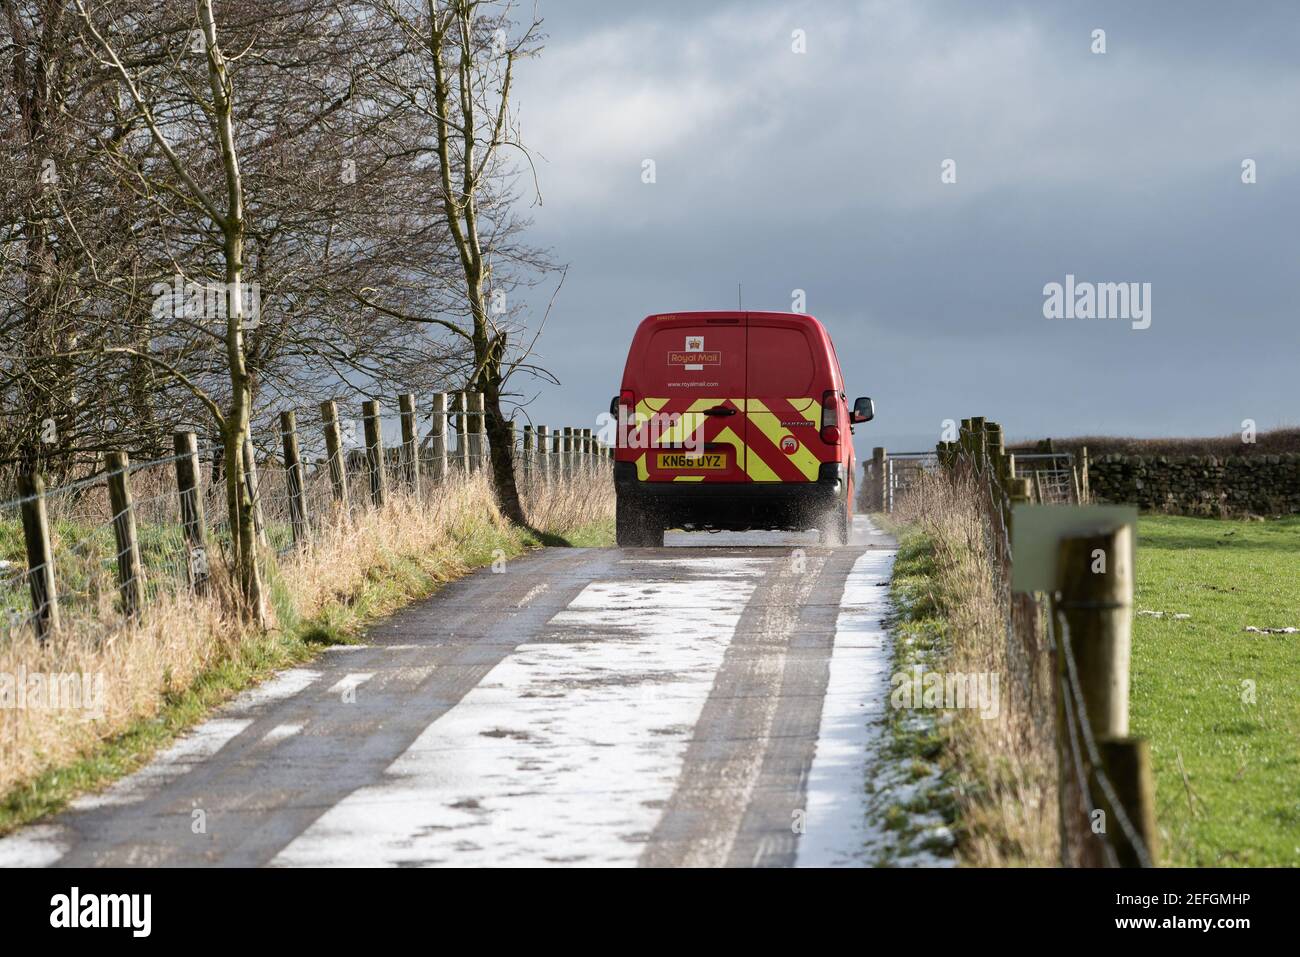 A Royal Mail van on an icy road, Chipping, Preston, Lancashire. Stock Photo